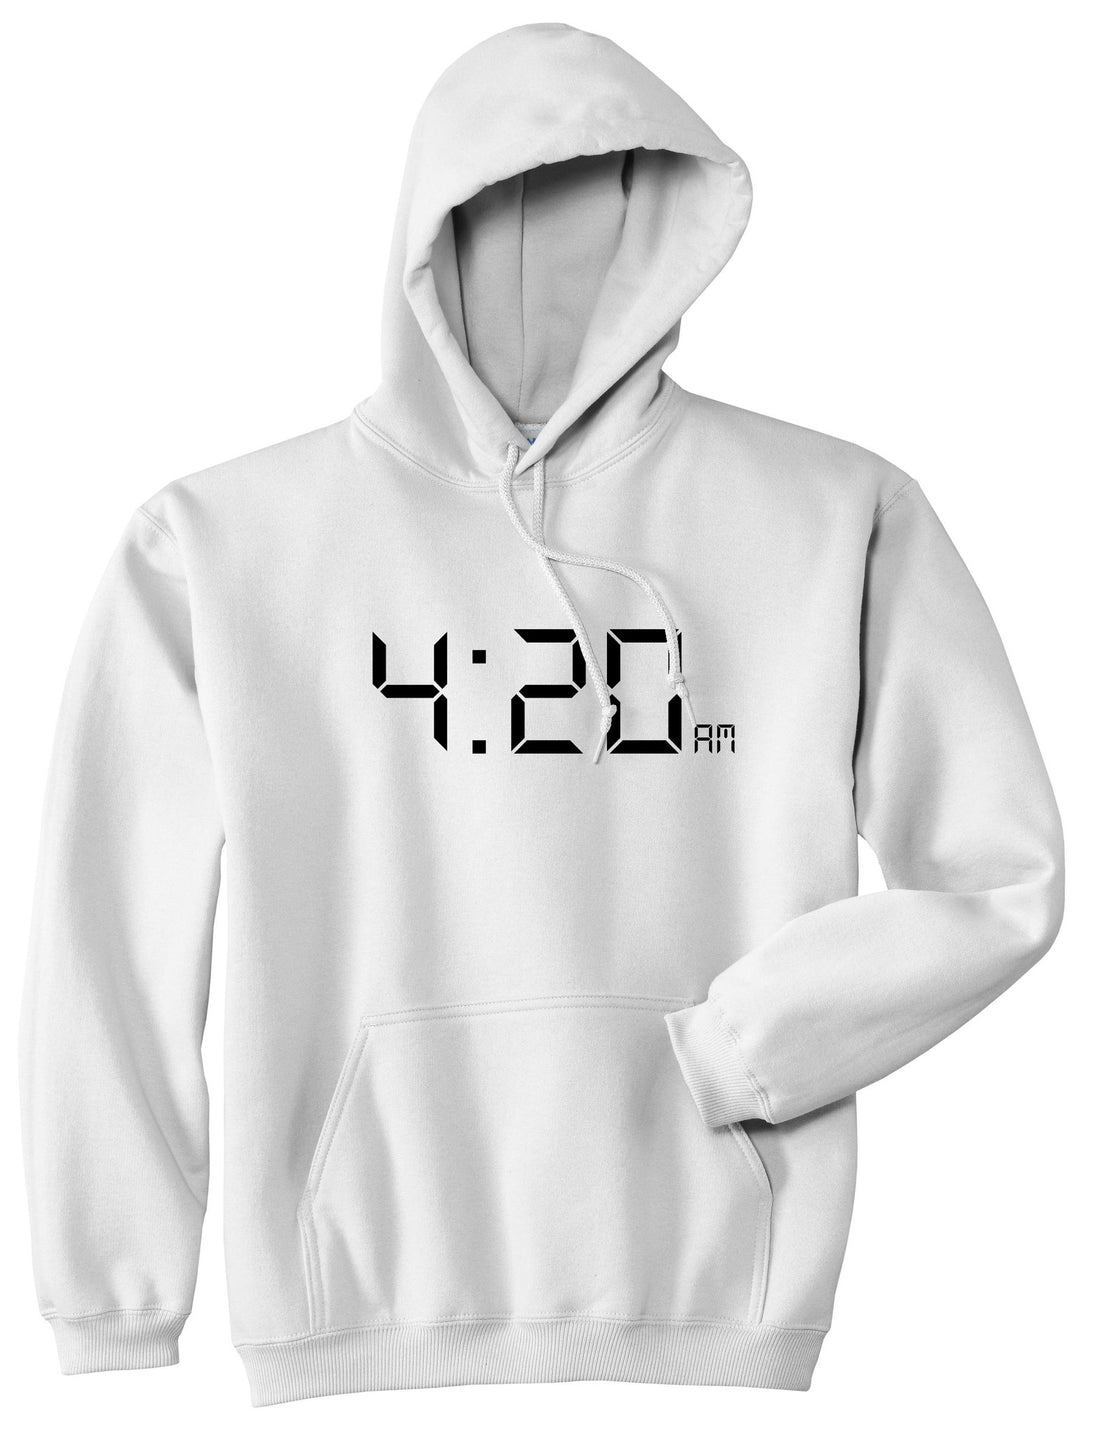 420 Time Weed Somker Pullover Hoodie in White By Kings Of NY